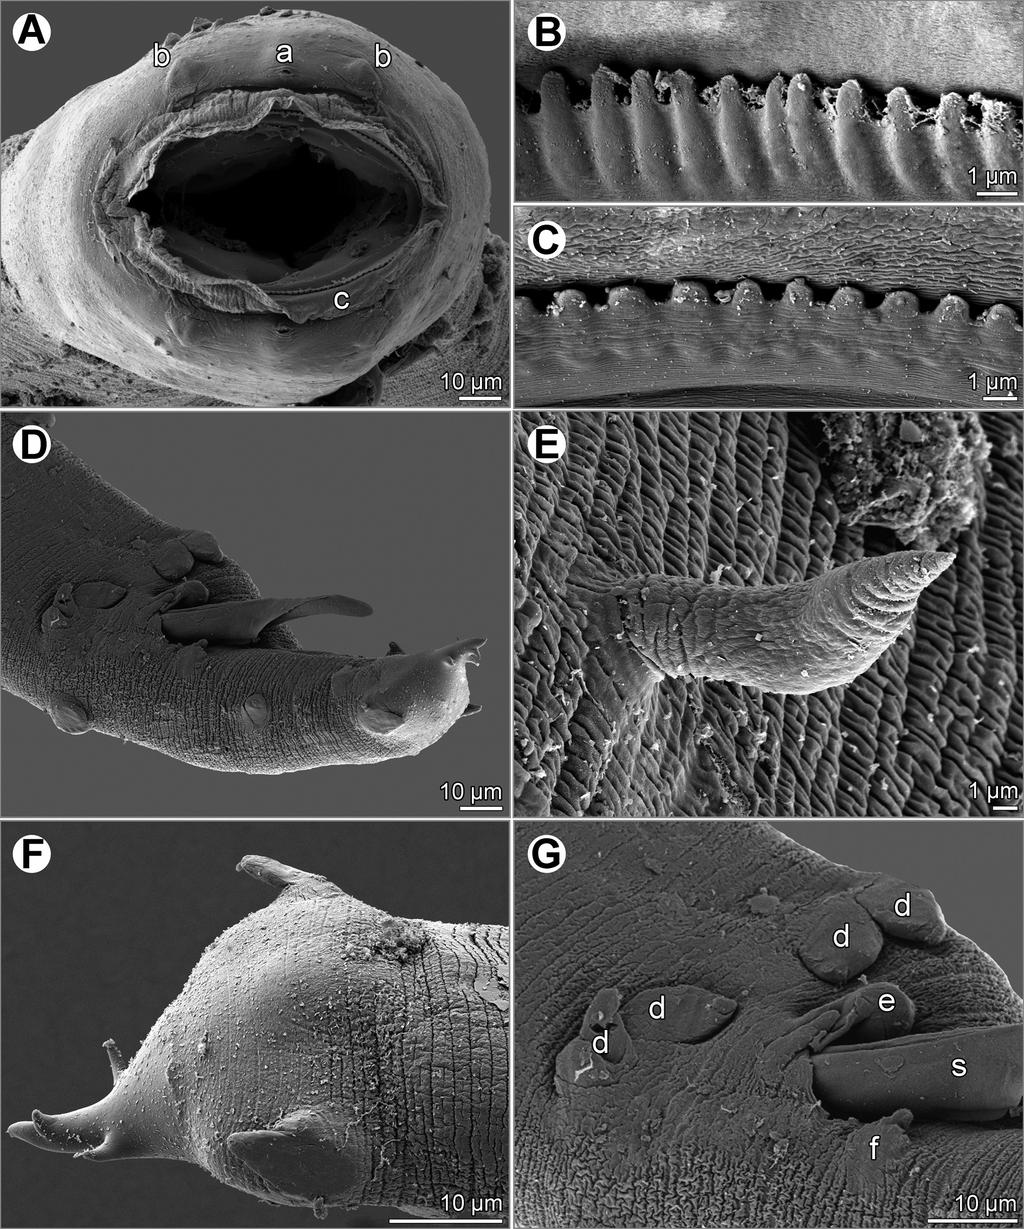 232 František Moravec et al. Fig. 2. Dichelyne (D.) spinigerus sp. nov., scanning electron micrographs: A cephalic end, apical view. B and C circumoral denticles of male and female, respectively.